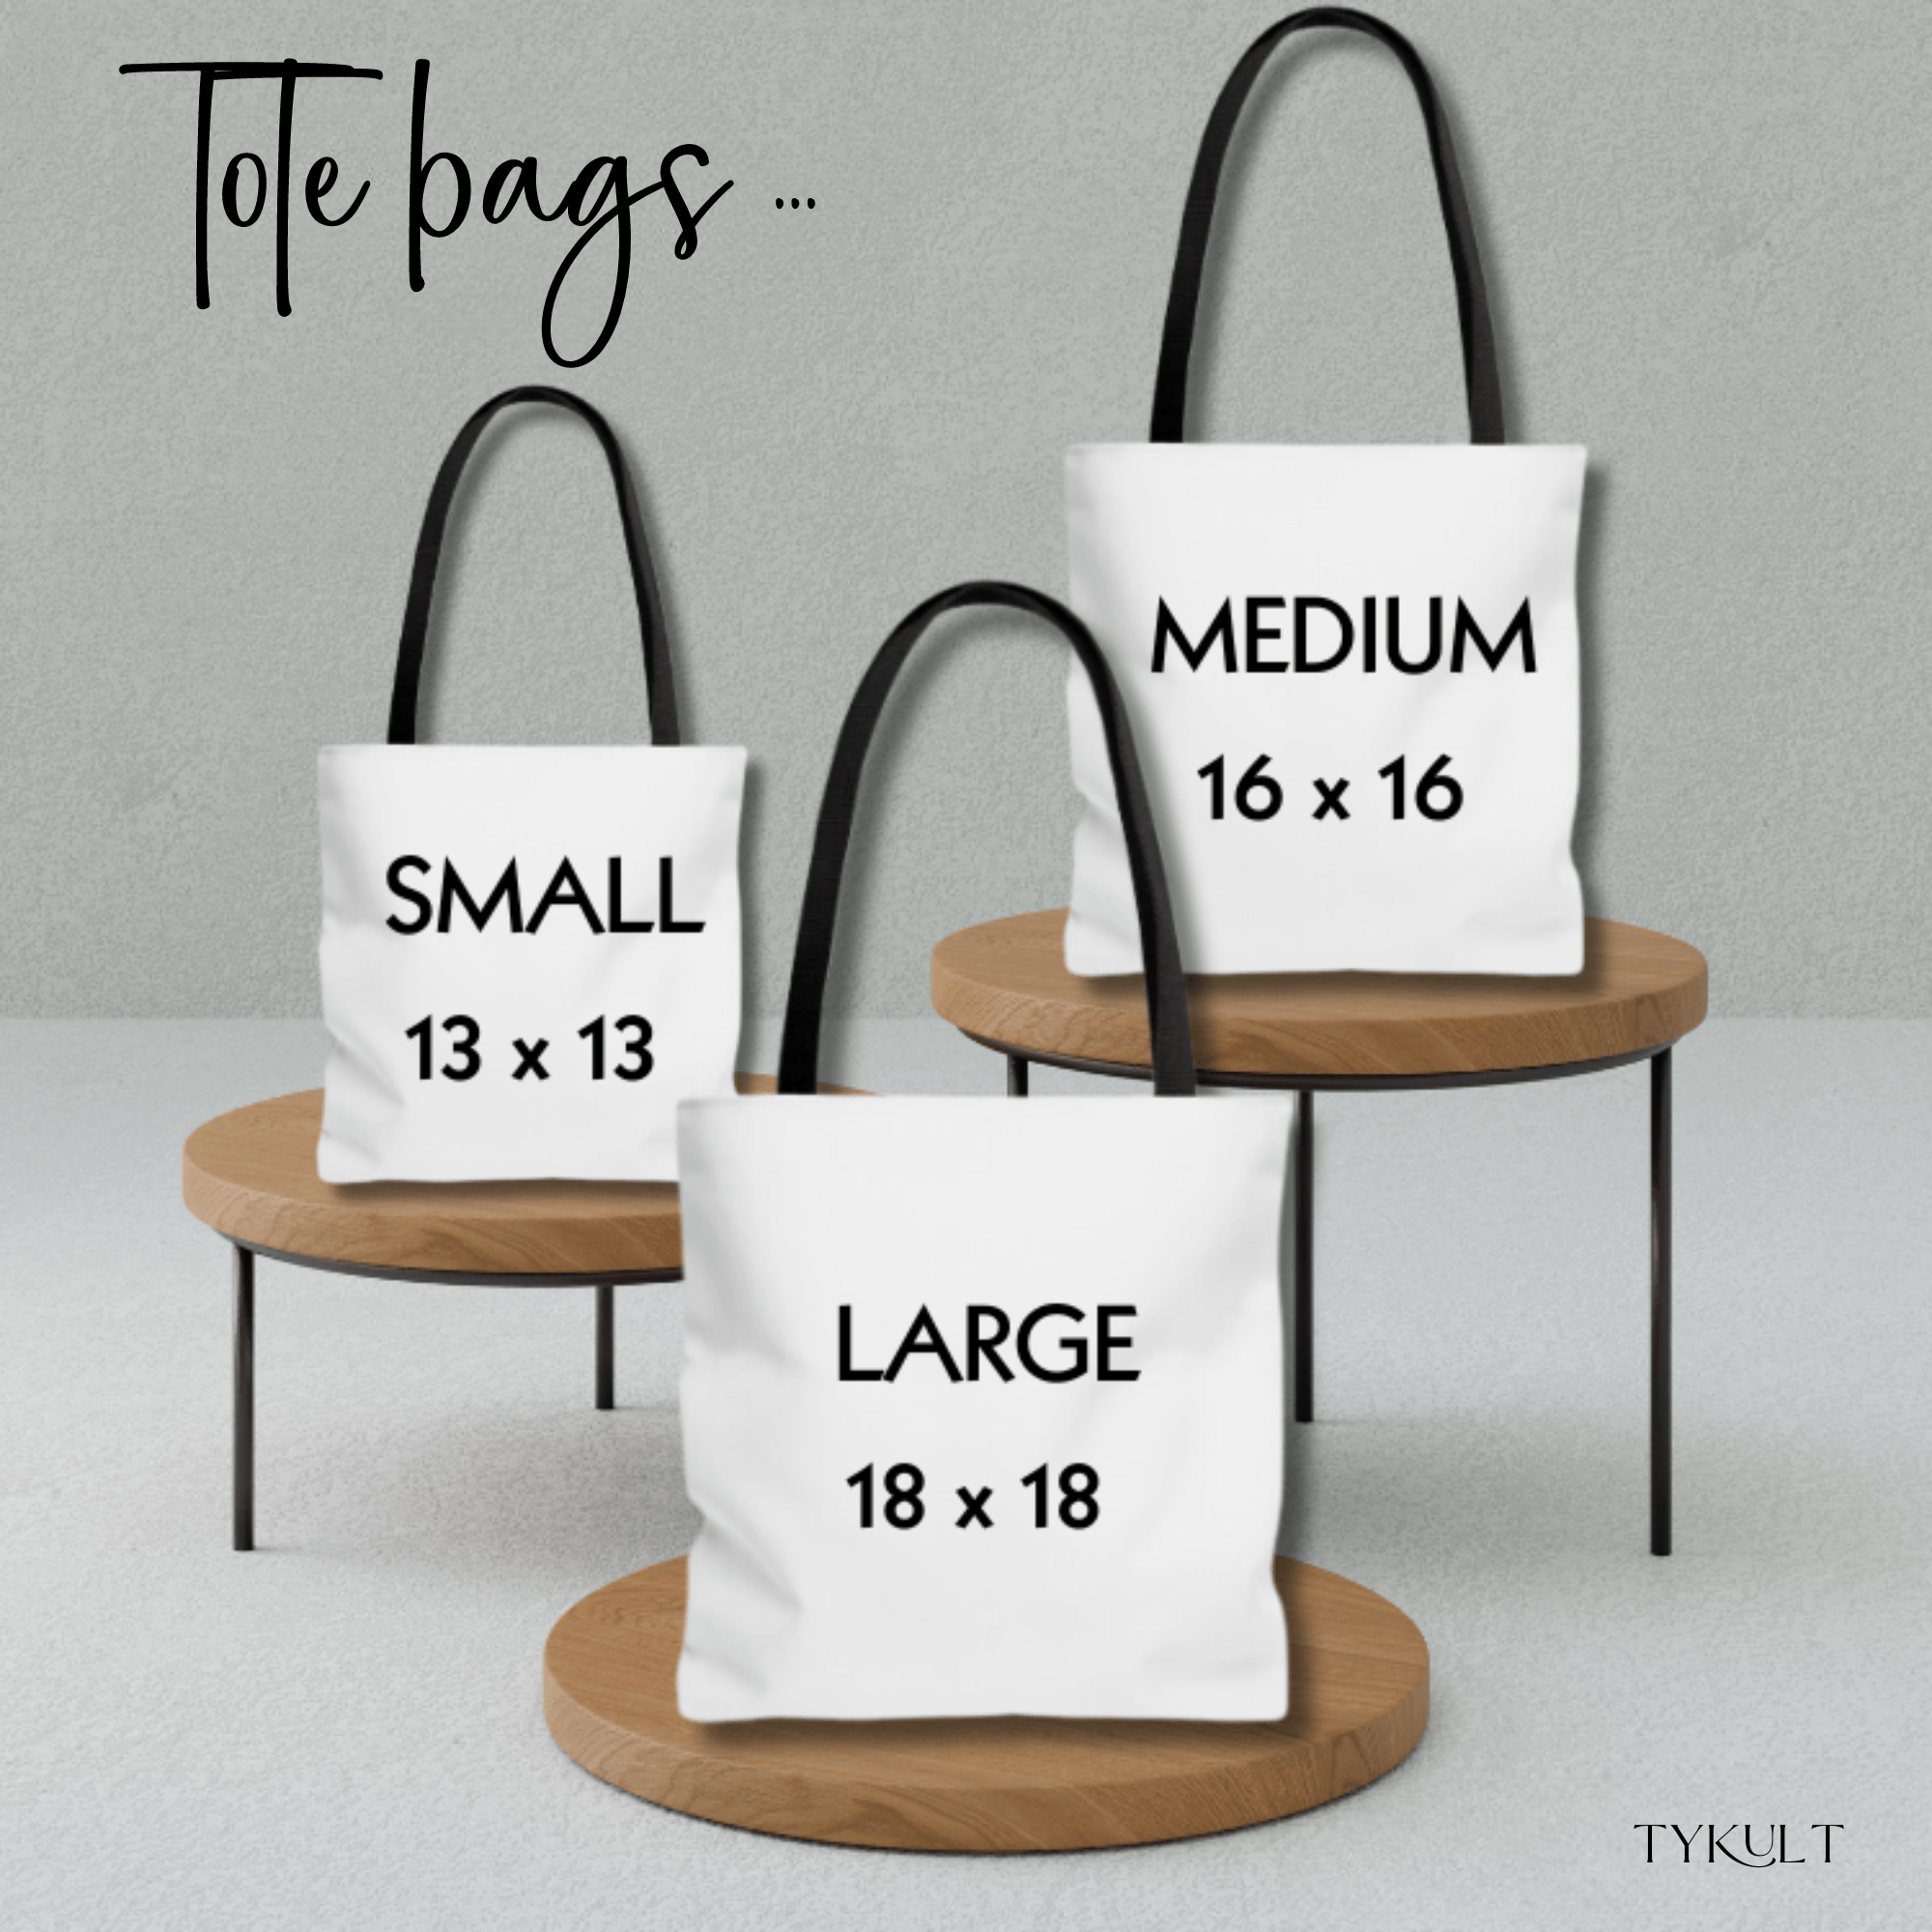 PERSONALIZABLE TOTE BAG | MONOGRAM - C | PERFECT GIFT for YOU, BFF, DAUGHTER